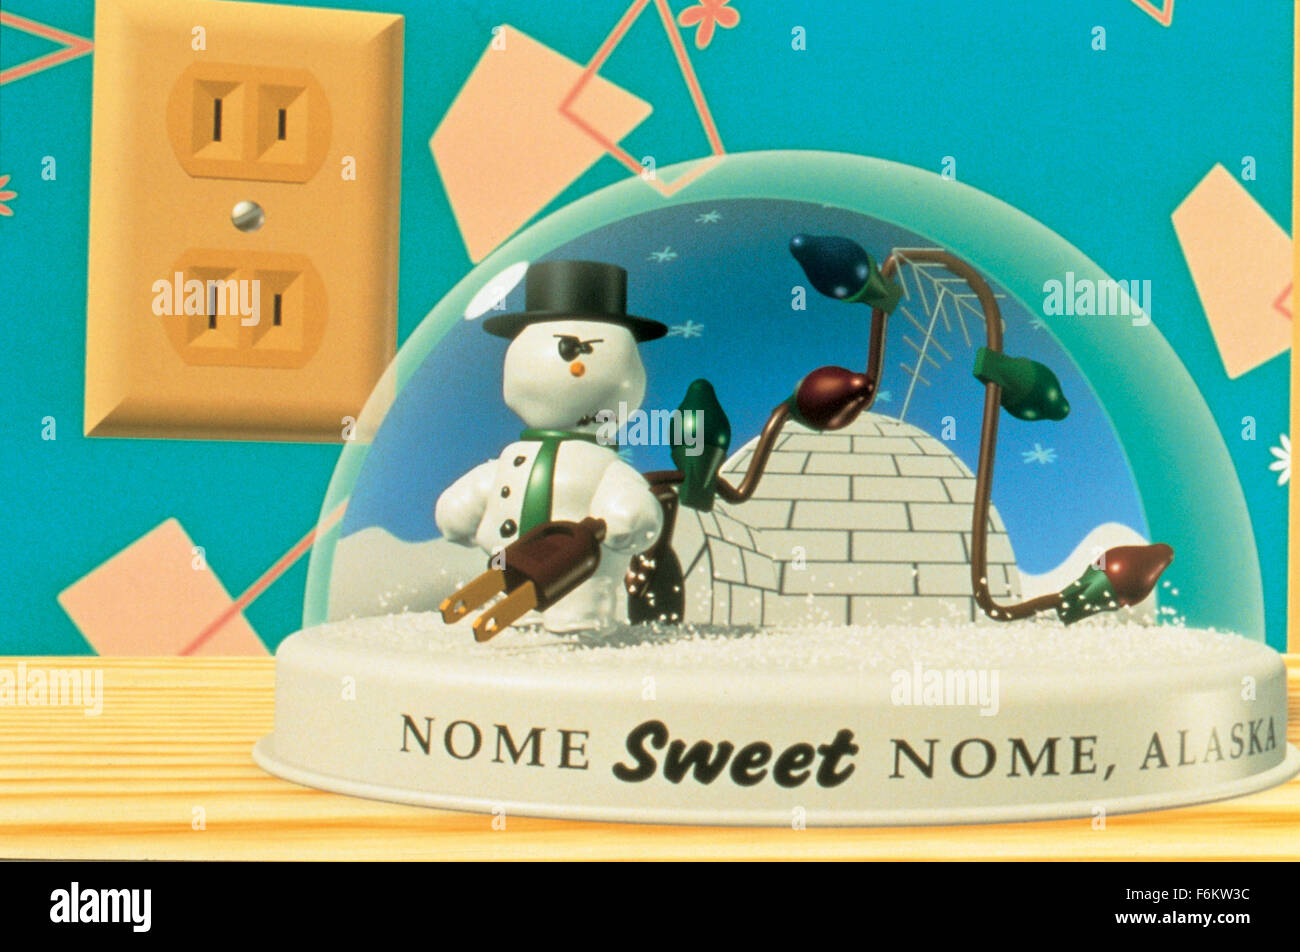 KNICK KNACK - A snowglobe snowman wants to join the other travel ...